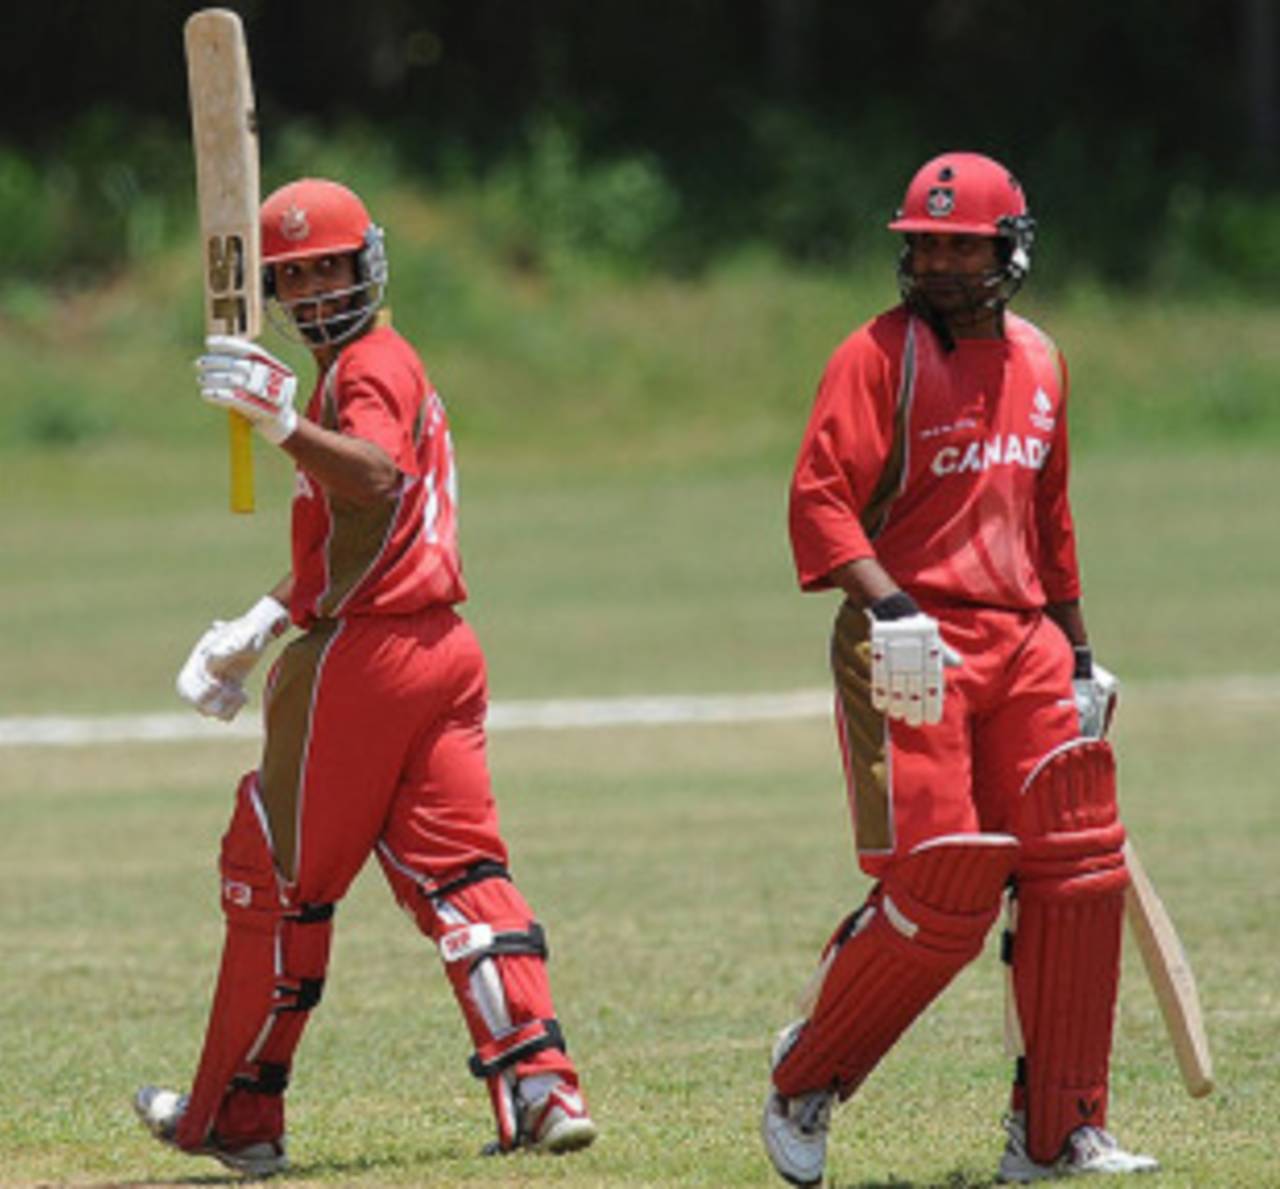 Canada are expected to have their own band of supporters for the T20 tournament&nbsp;&nbsp;&bull;&nbsp;&nbsp;Digicel